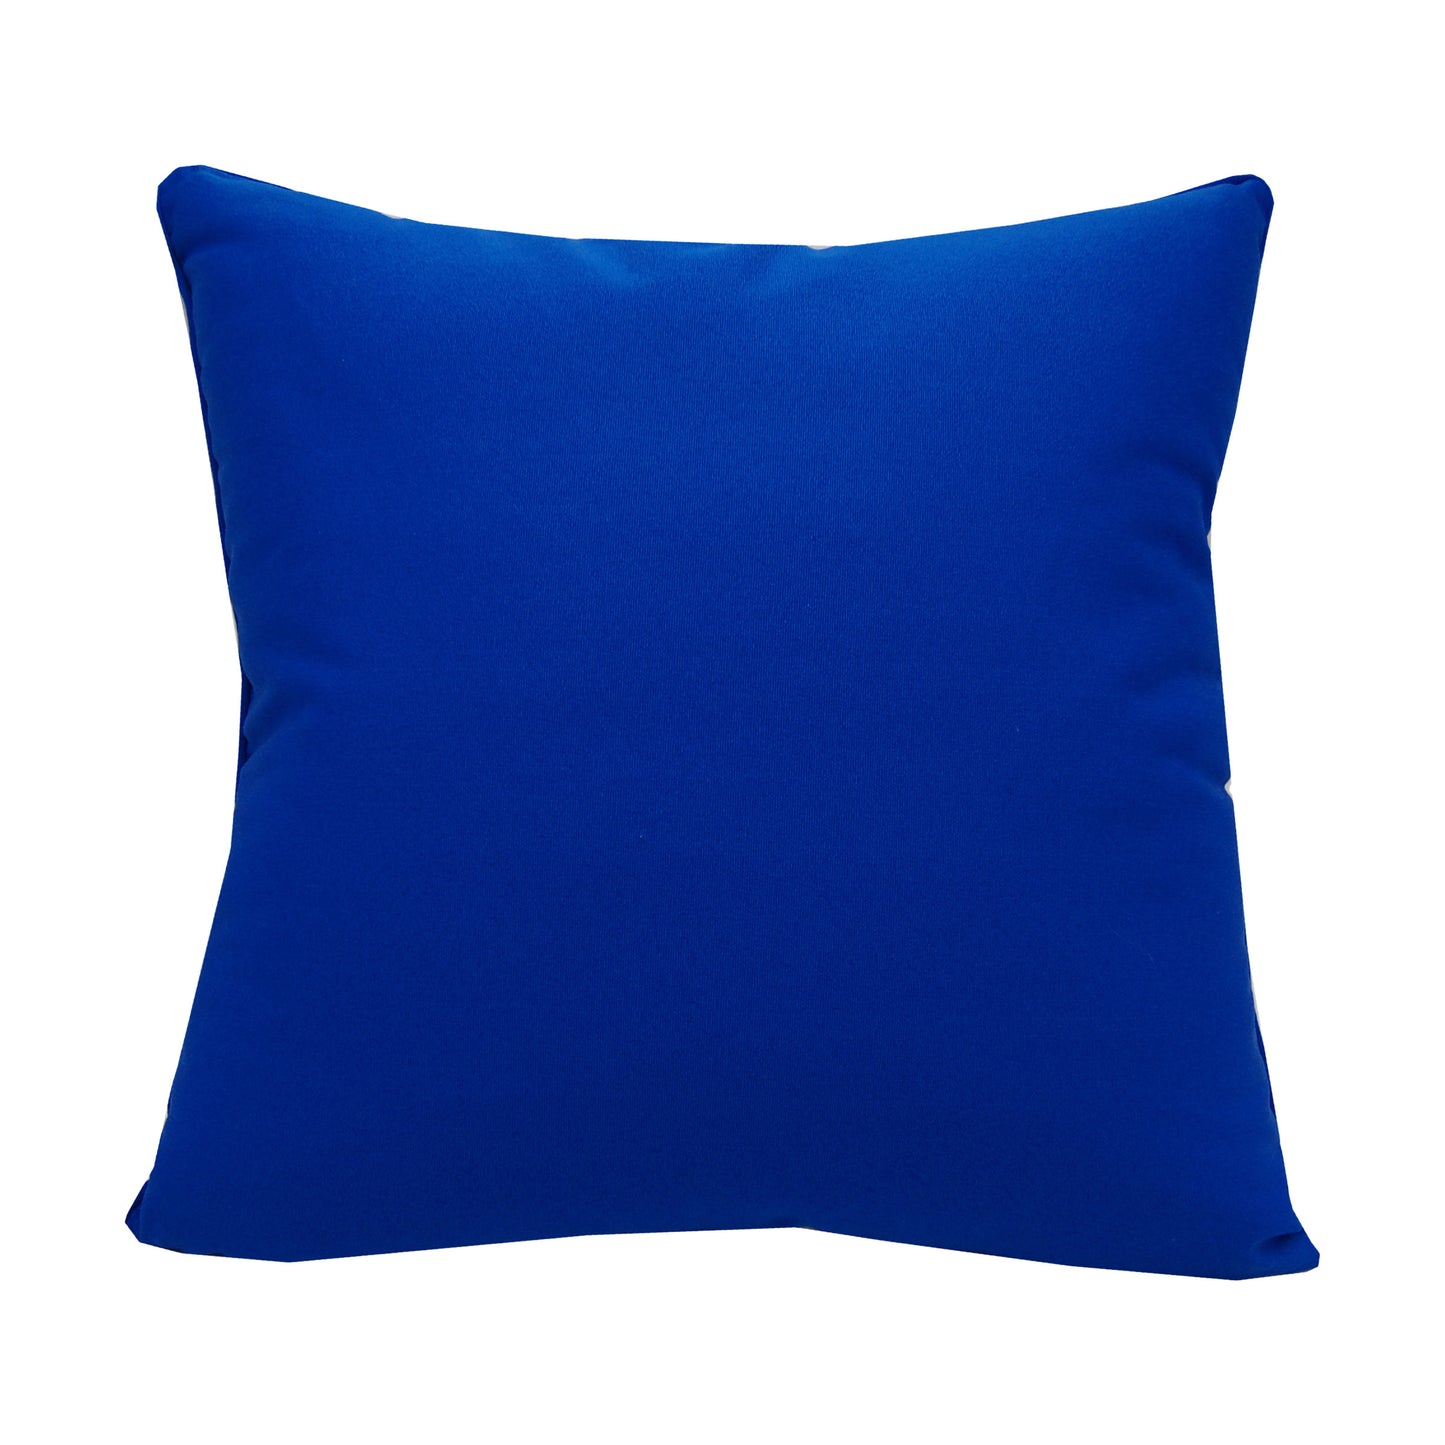 Solid blue fabric; back side of the Bold Blue Butterfly pillow.